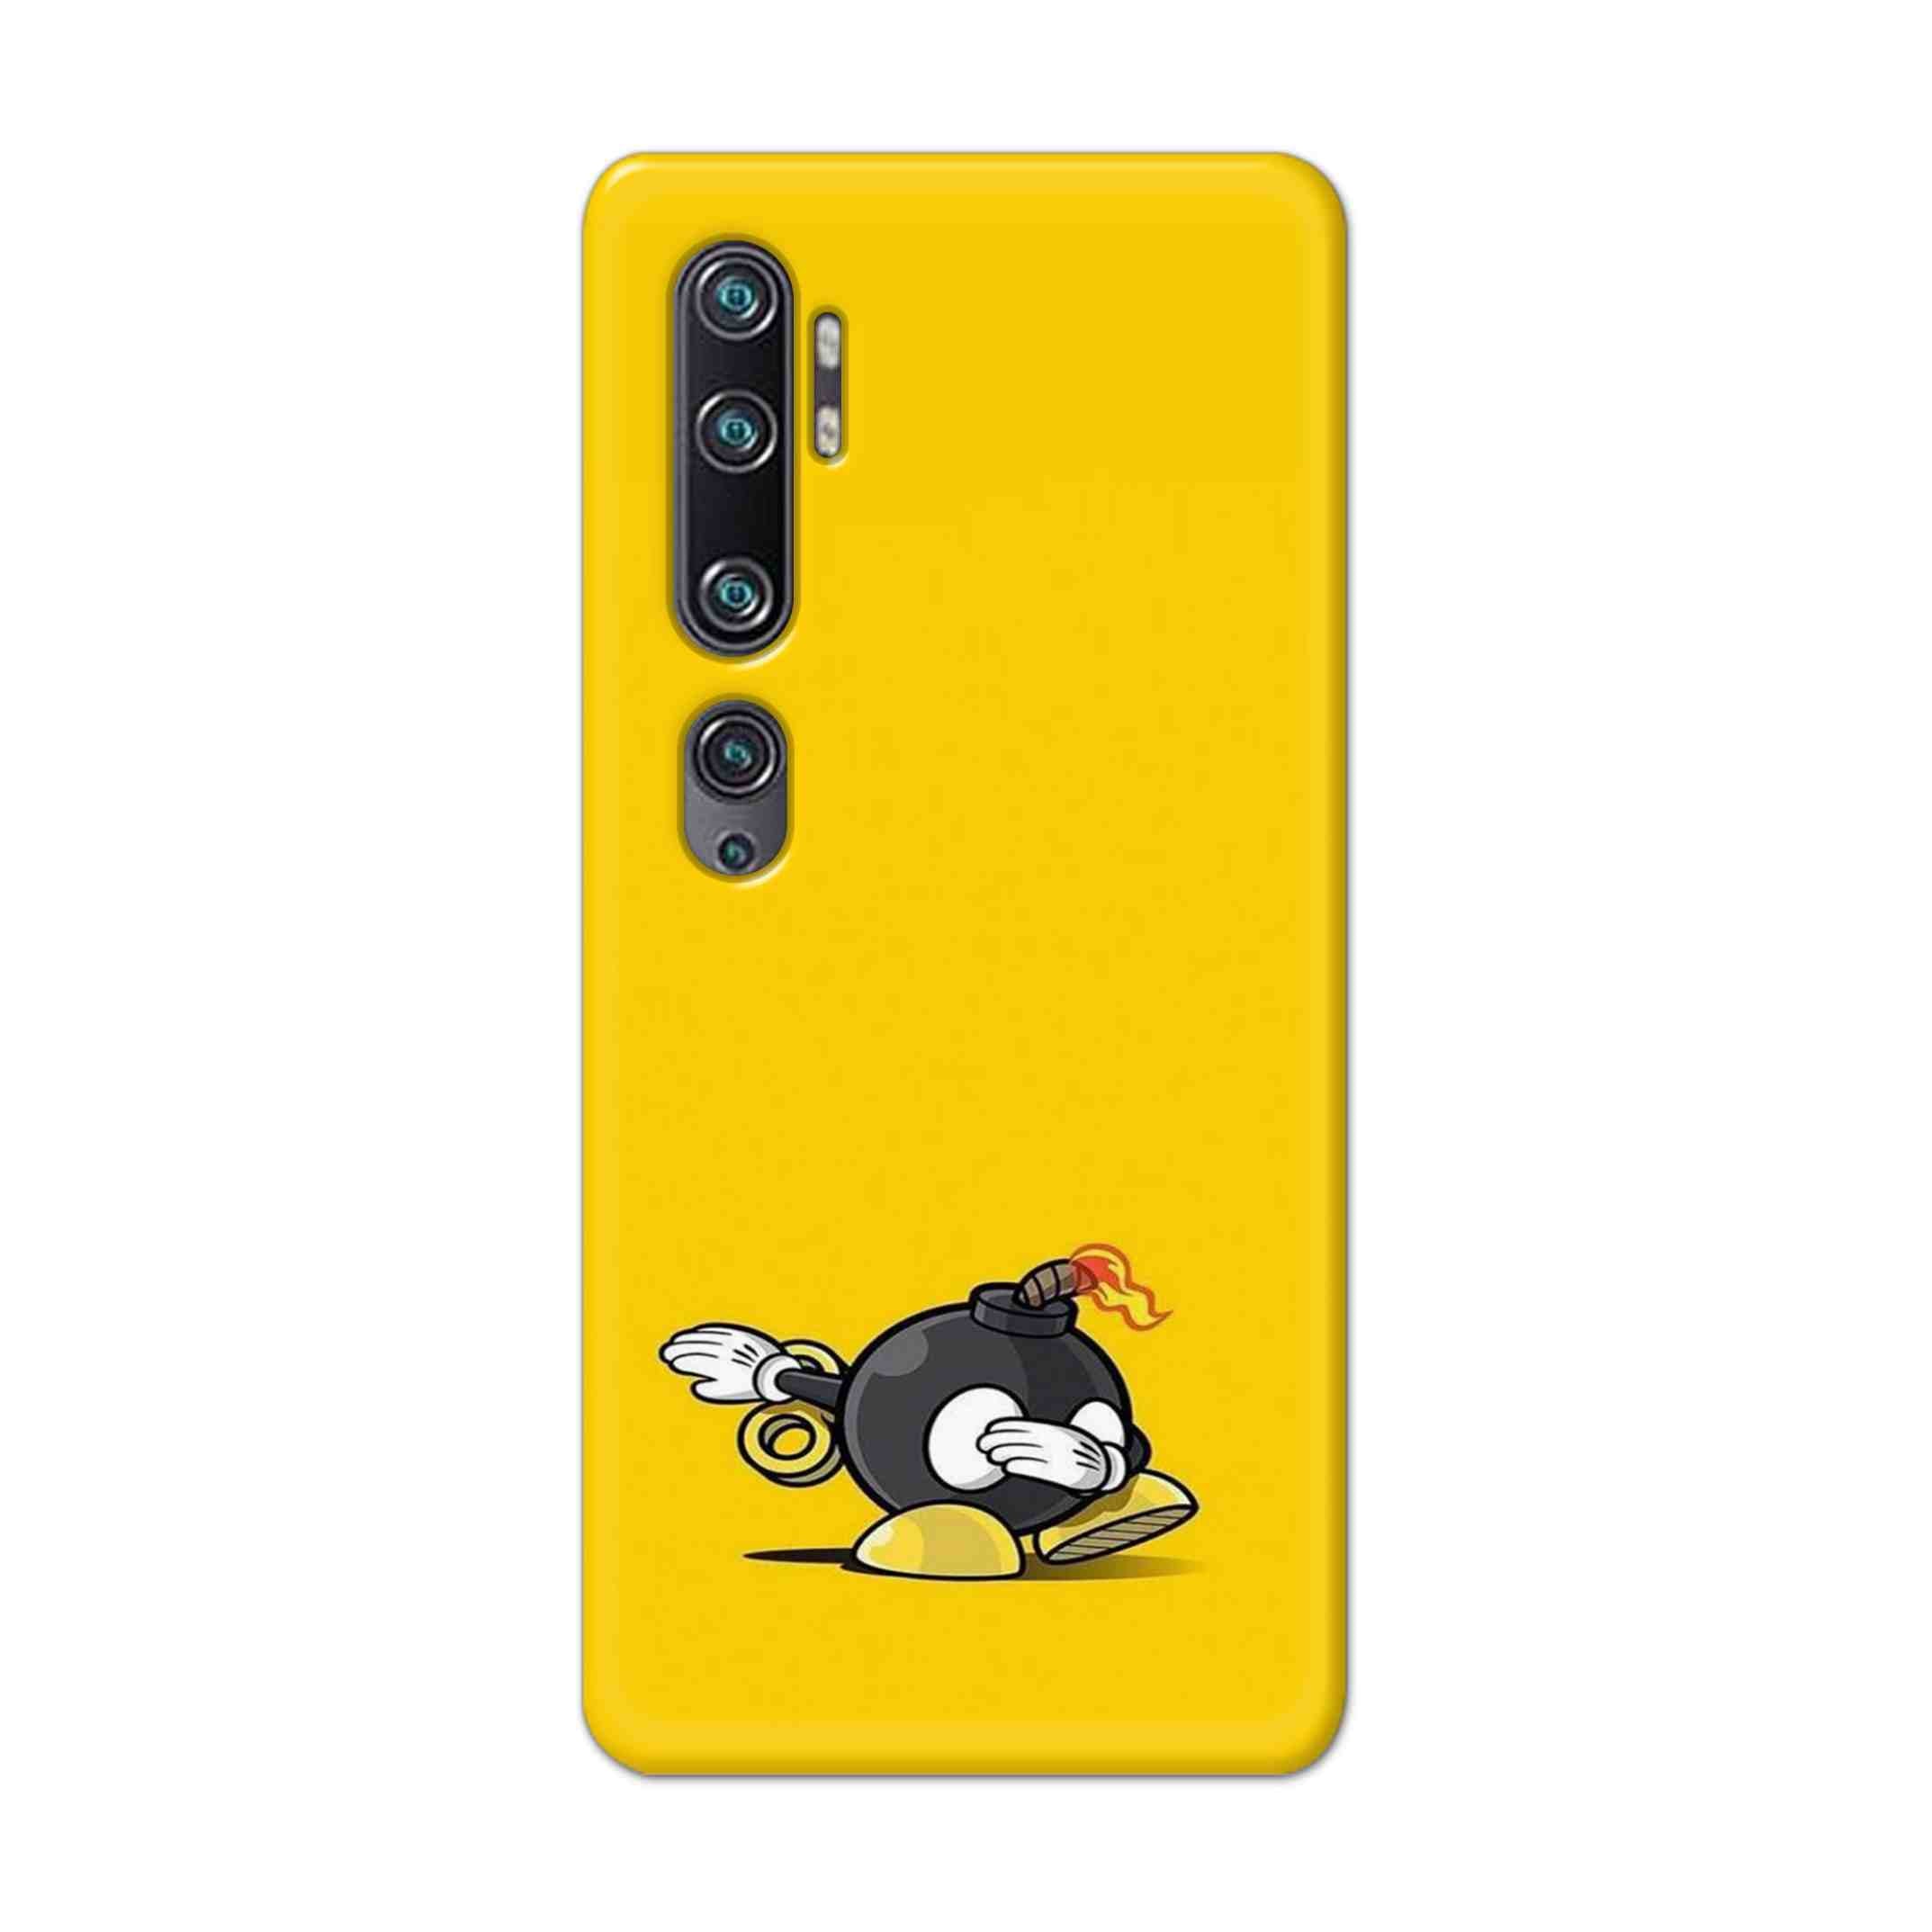 Buy Dashing Bomb Hard Back Mobile Phone Case Cover For Xiaomi Mi Note 10 Online